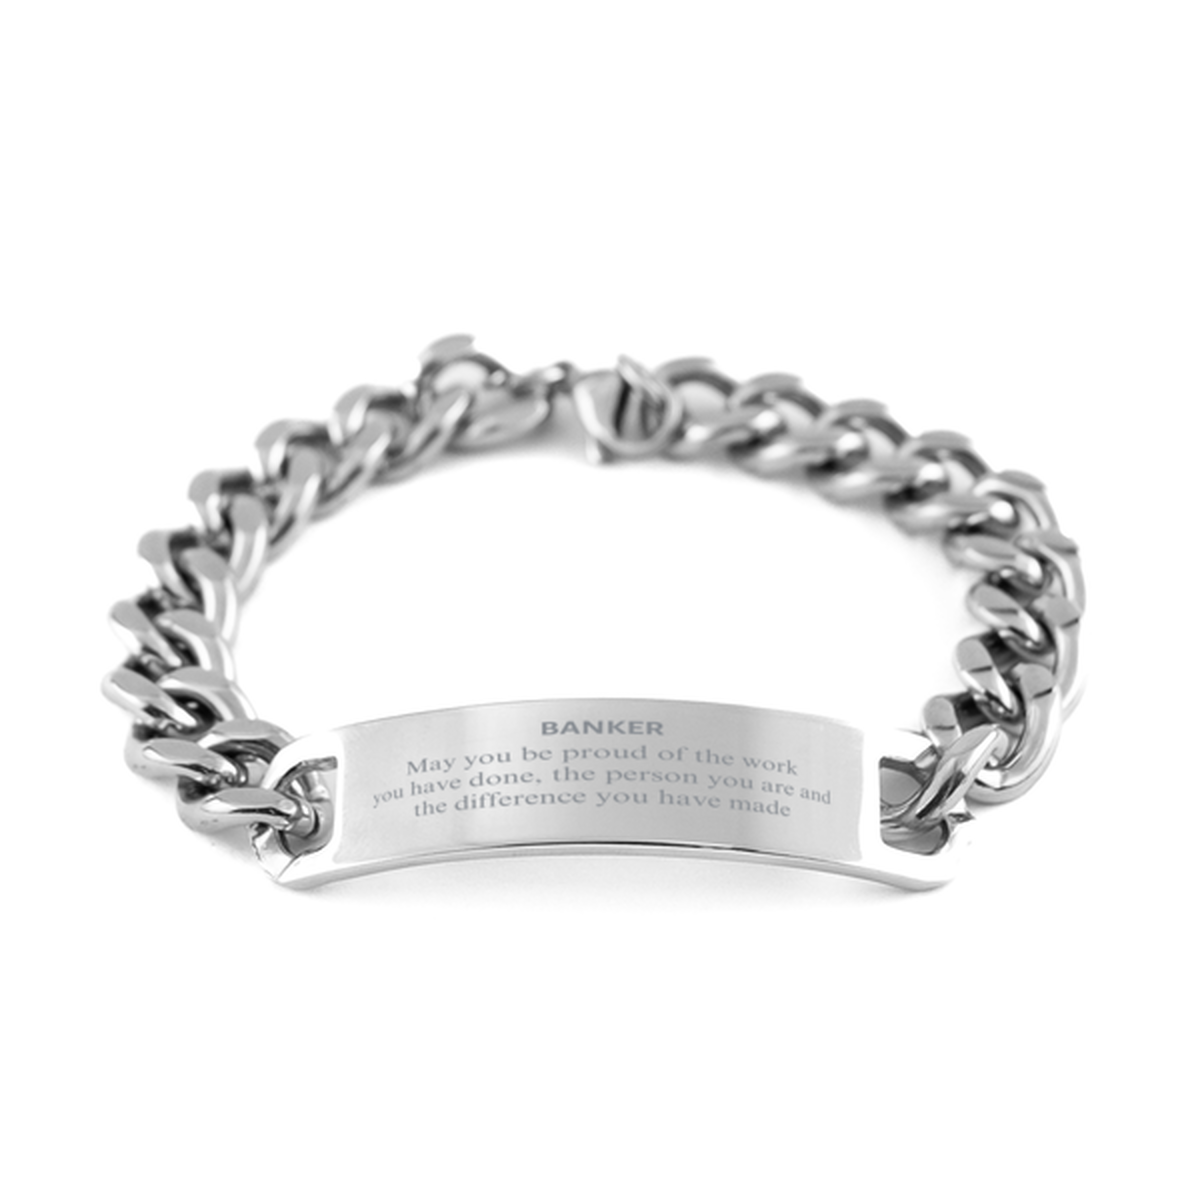 Banker May you be proud of the work you have done, Retirement Banker Cuban Chain Stainless Steel Bracelet for Colleague Appreciation Gifts Amazing for Banker